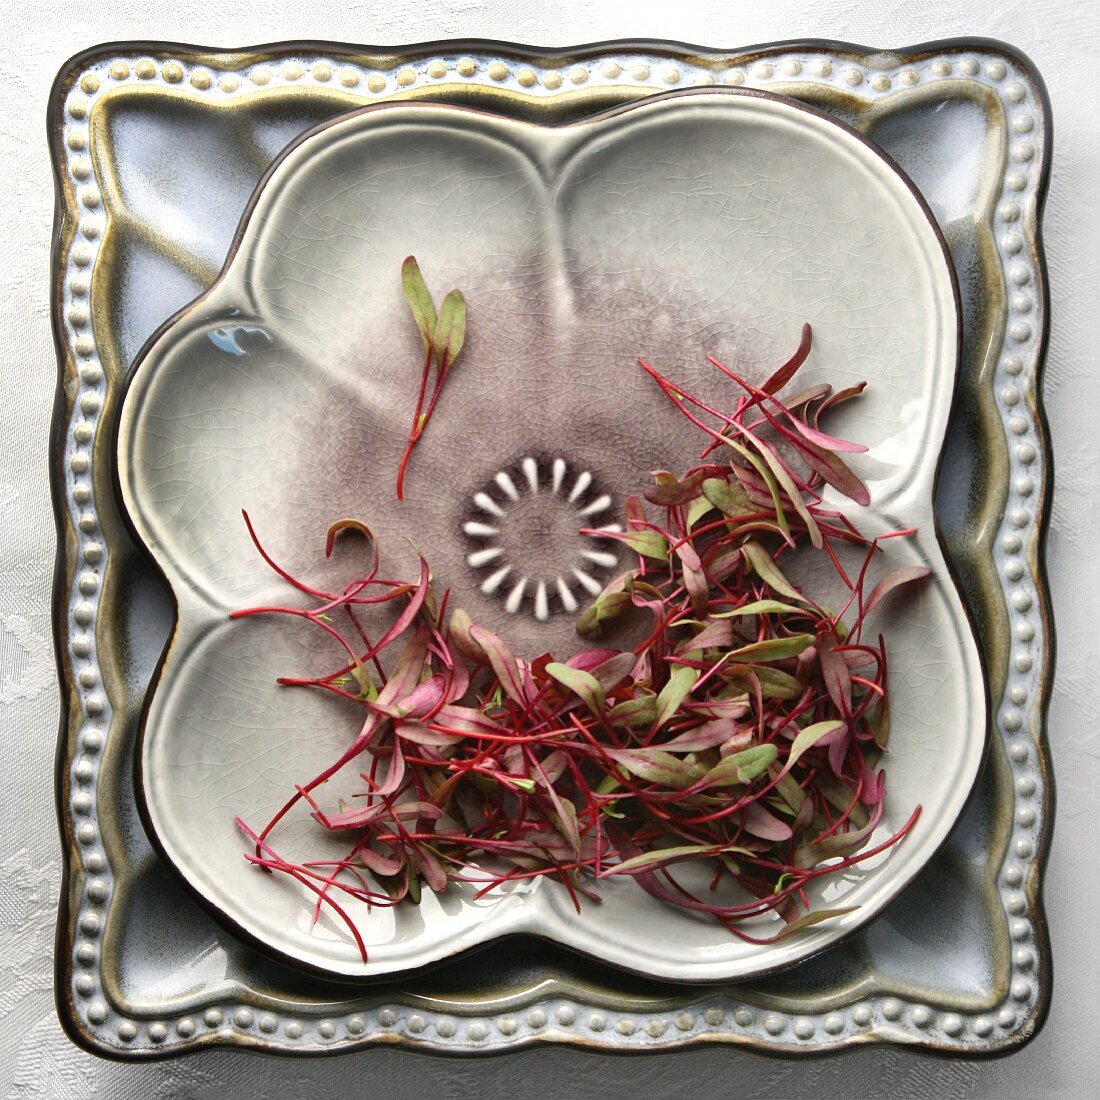 Bulls Blood Micro Greens on a Deorative Square Plate